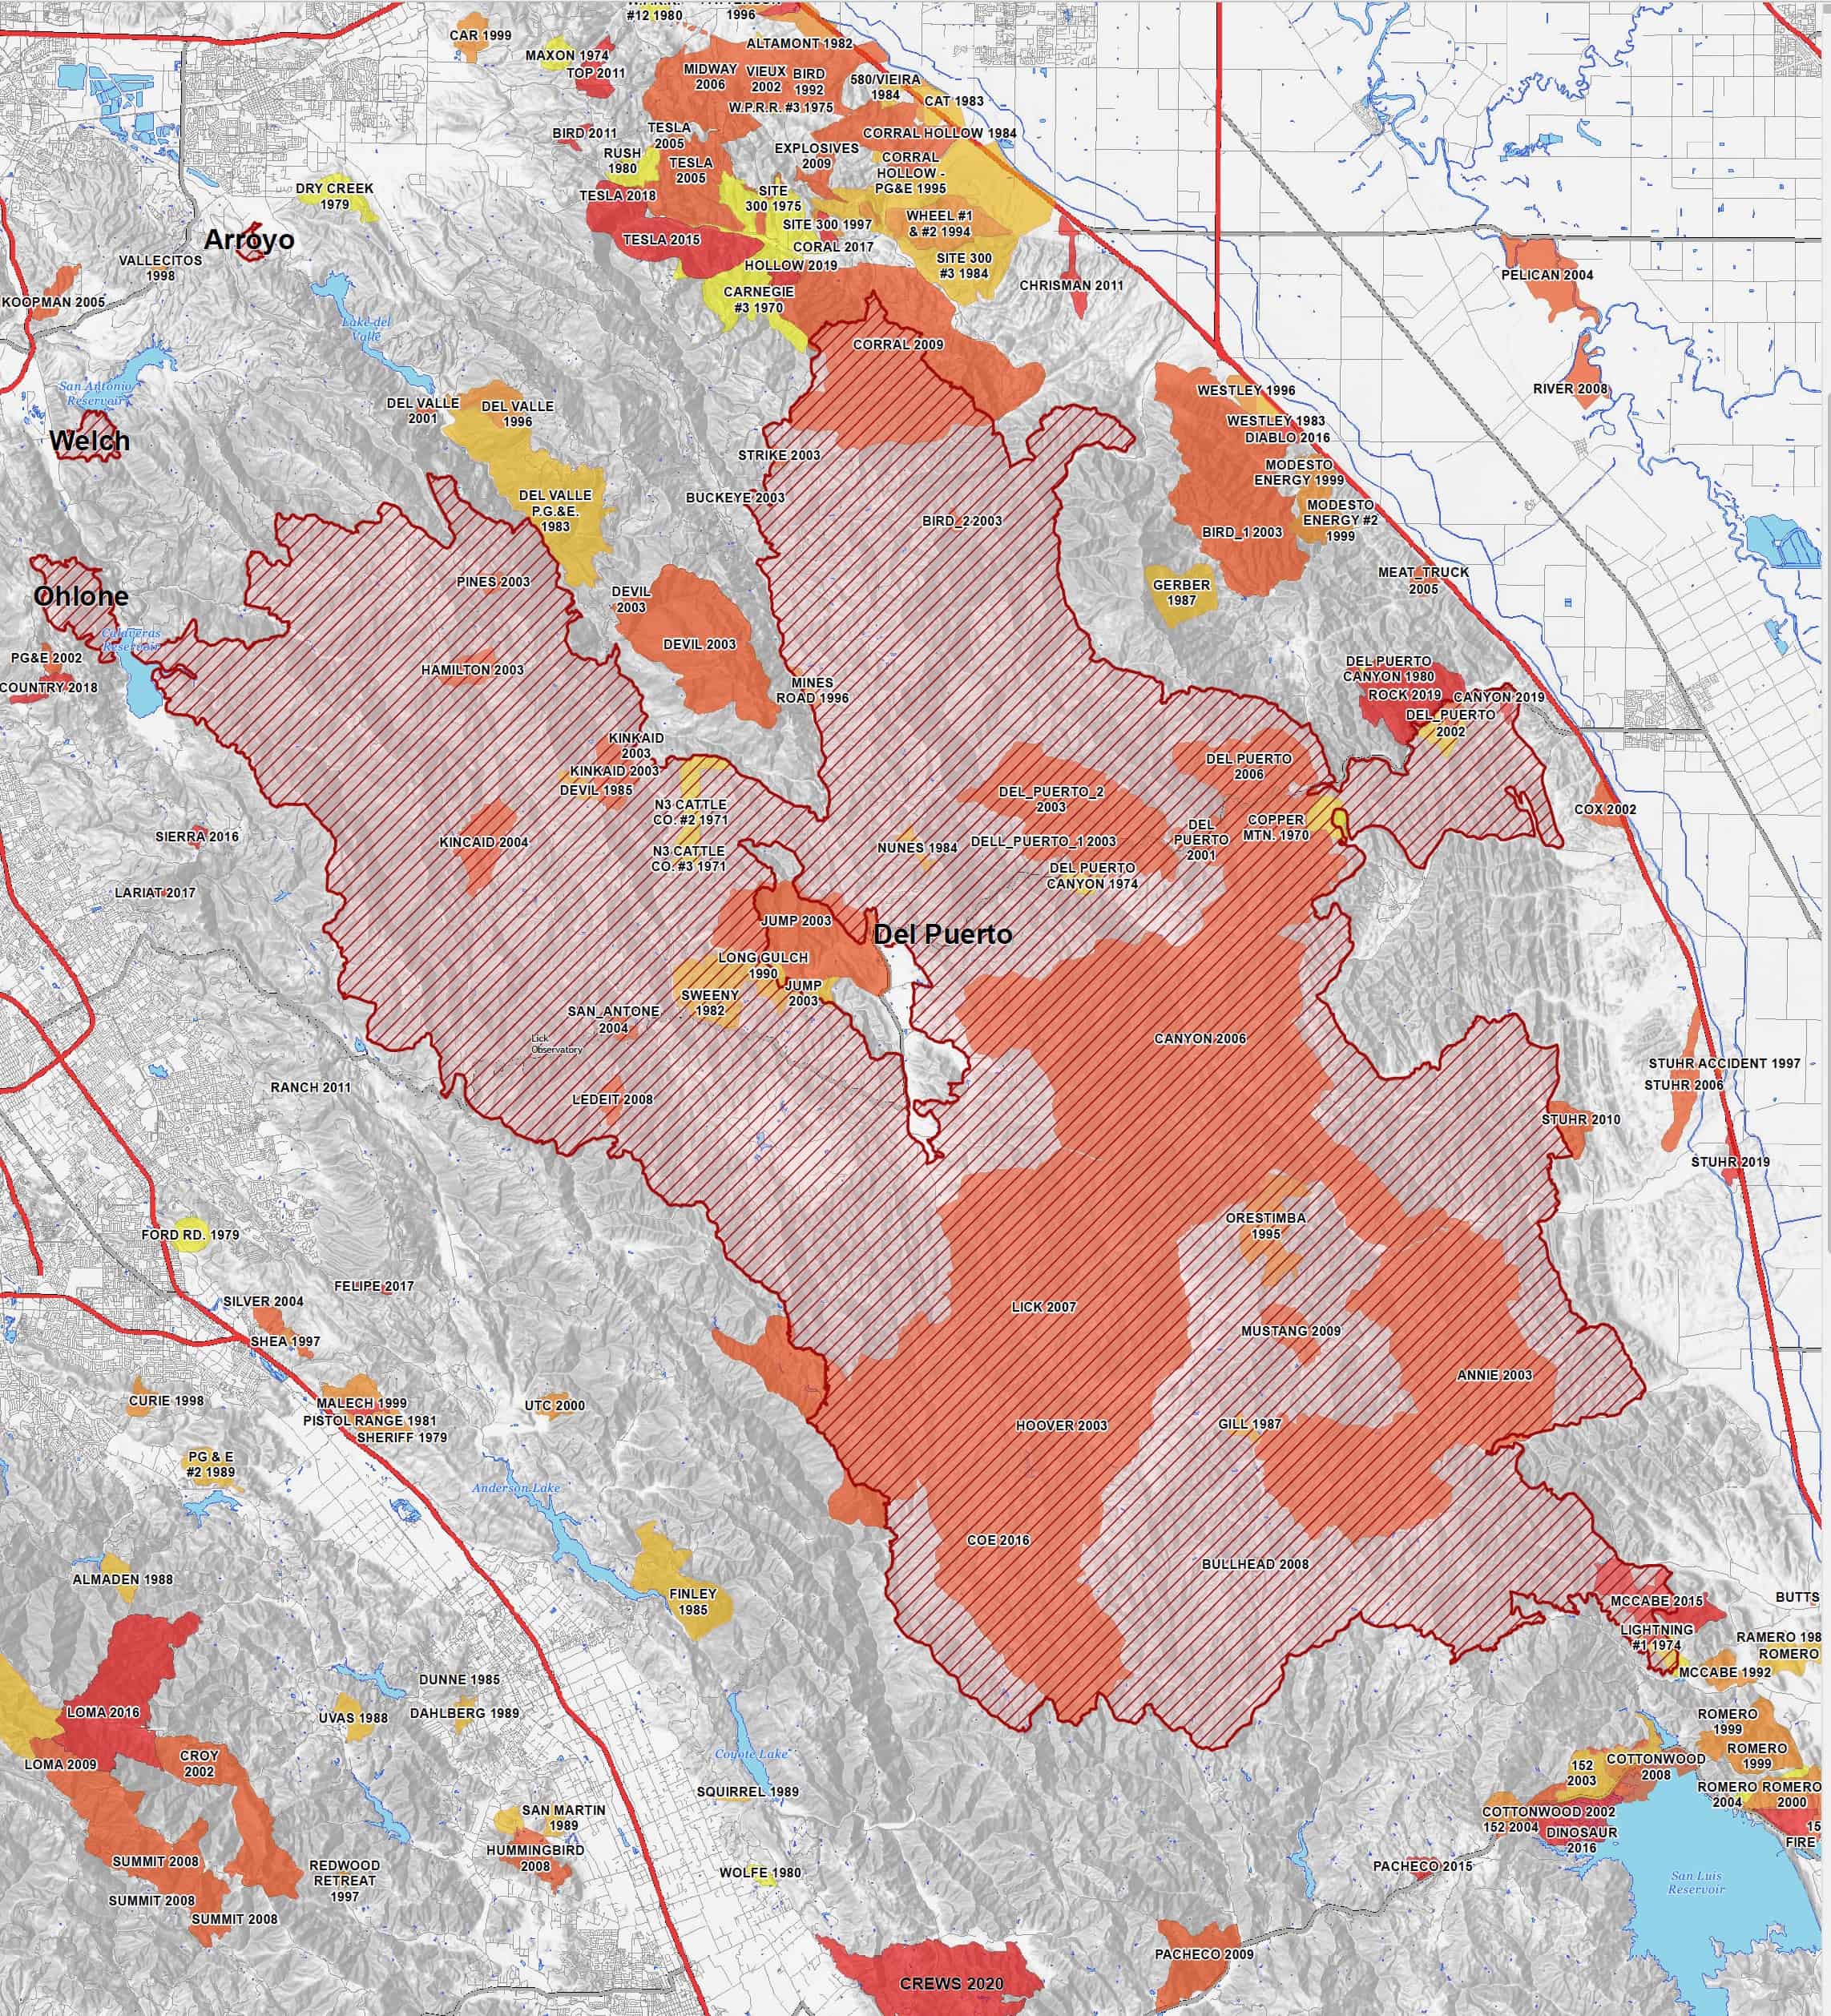 A map showing the history of California's fires